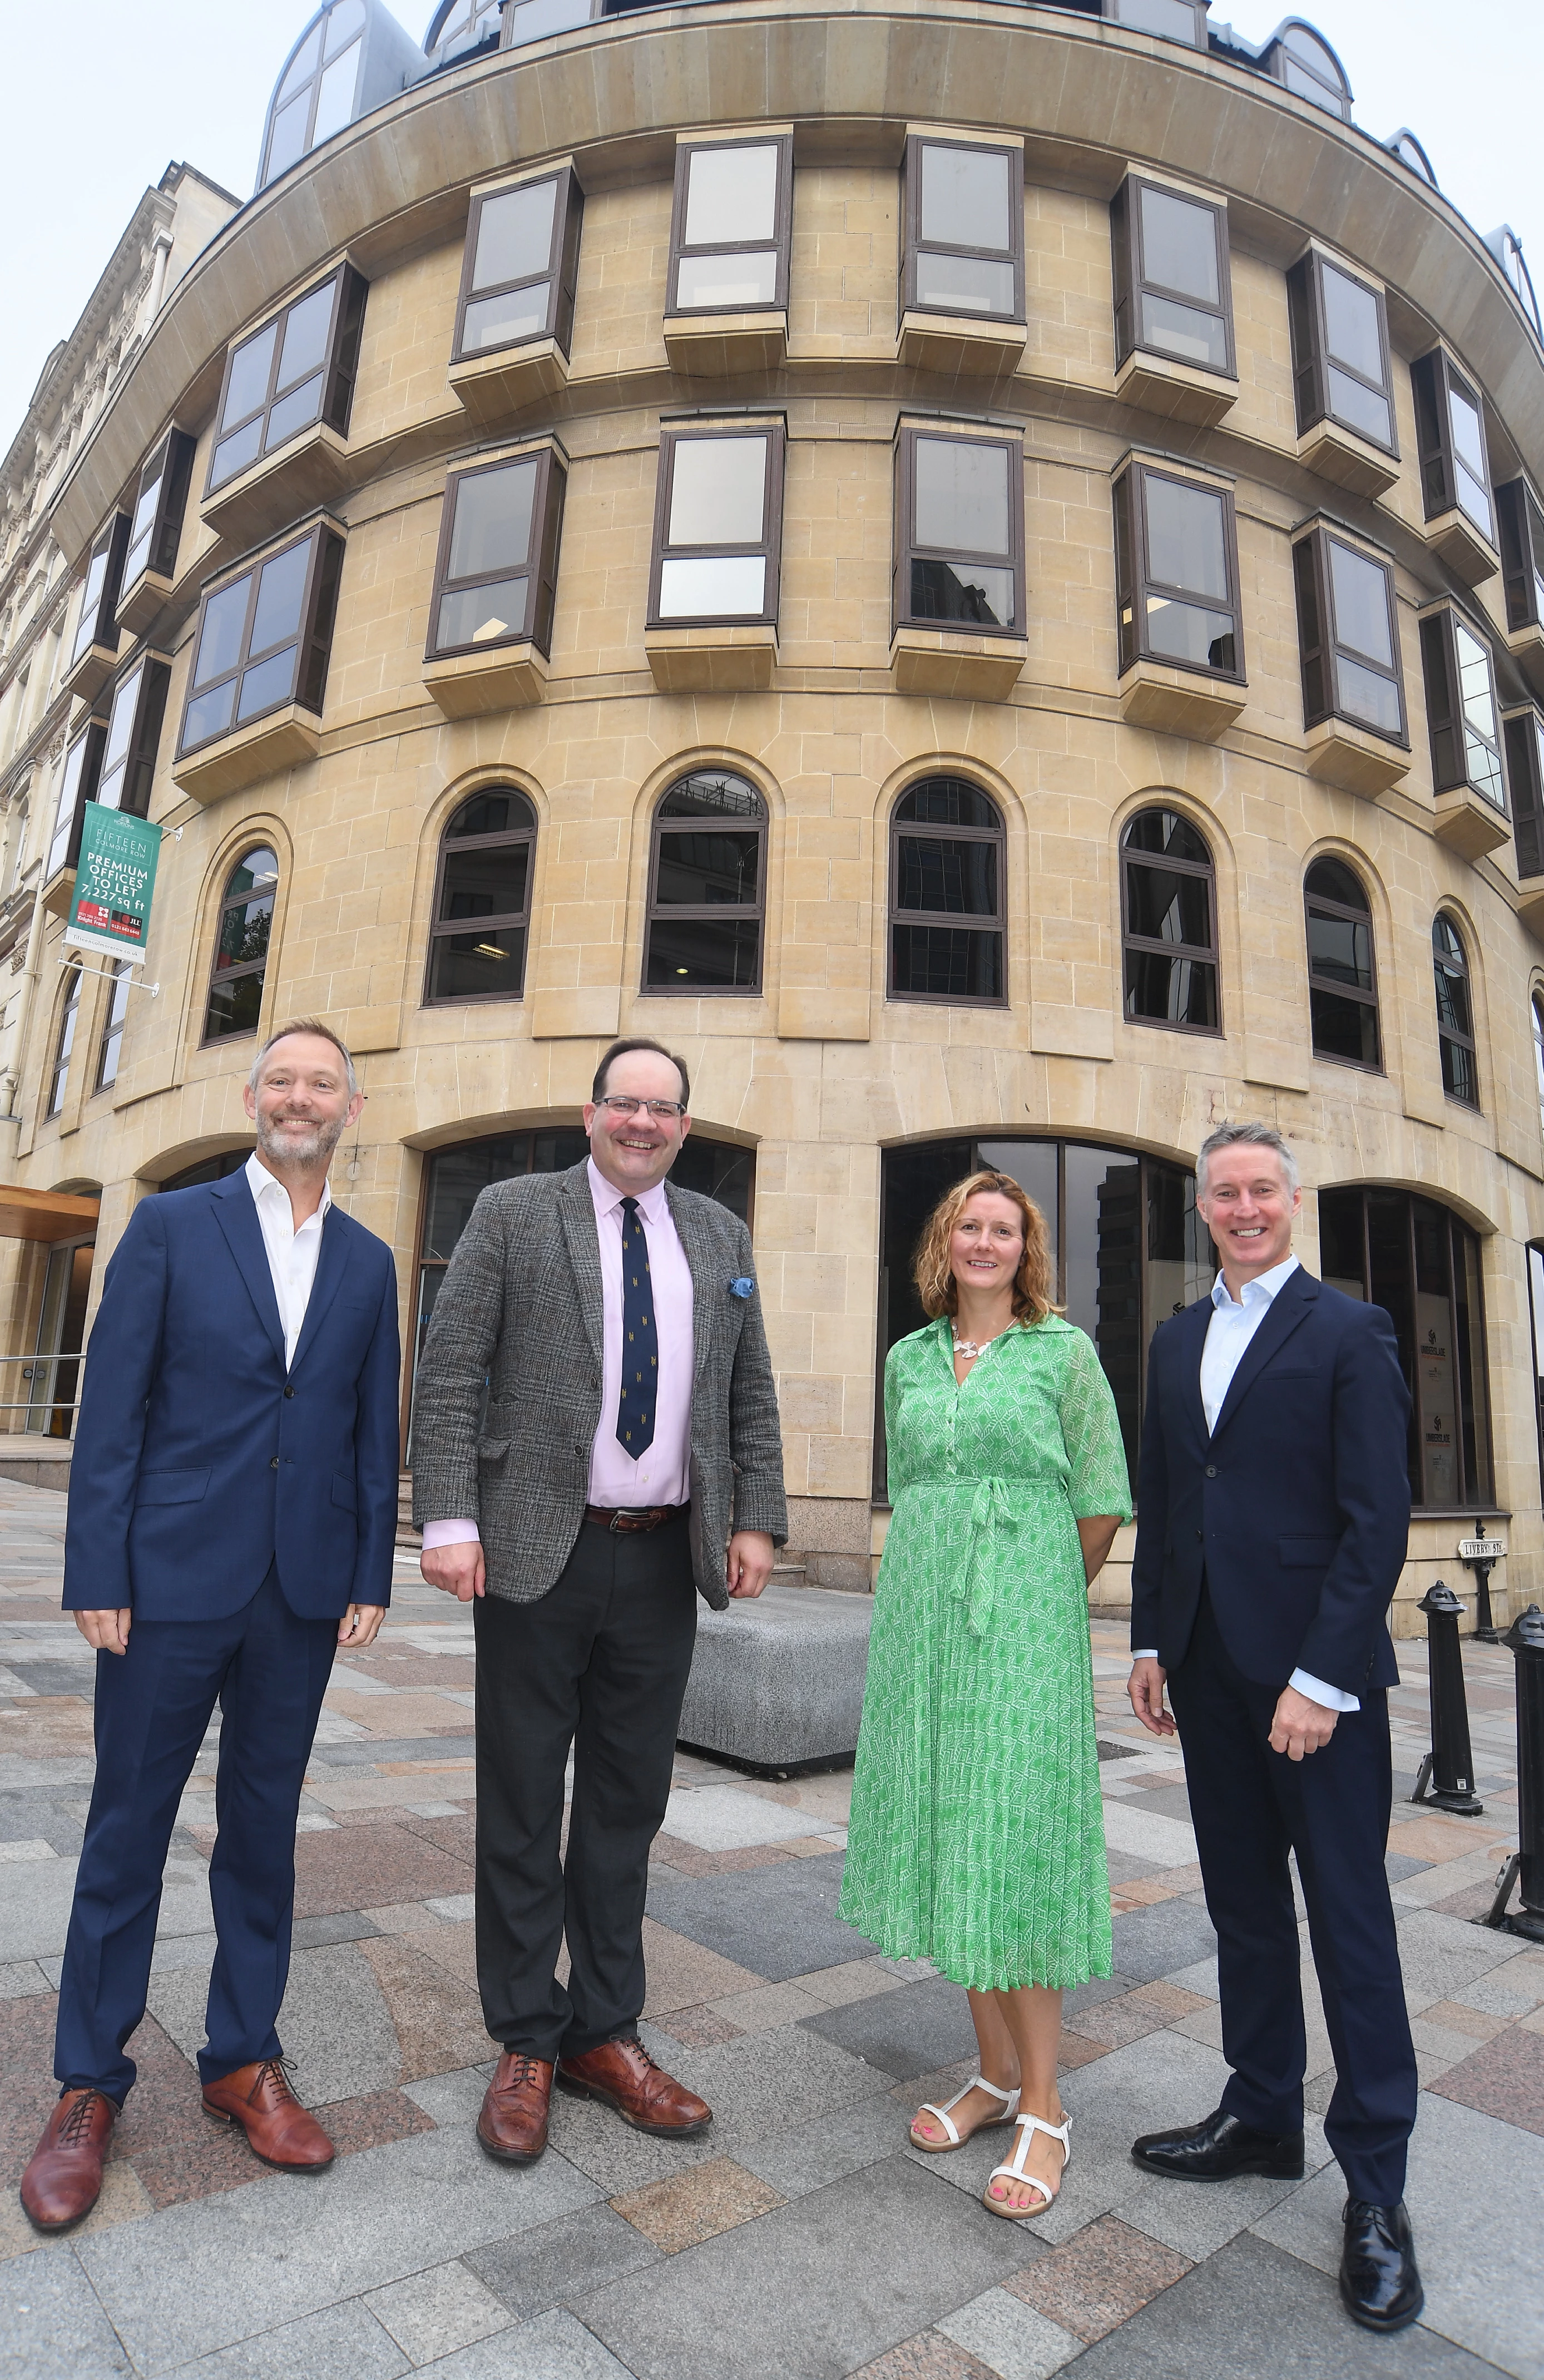 From left: Mike Price (Head of Commercial Agency at Fisher German), Charles Warrack (Partner at Fisher German), Nina Meeks (Hortons), and Stuart Flint (Divisional Managing Partner at Fisher German) outside Fifteen Colmore Row in Birmingham.